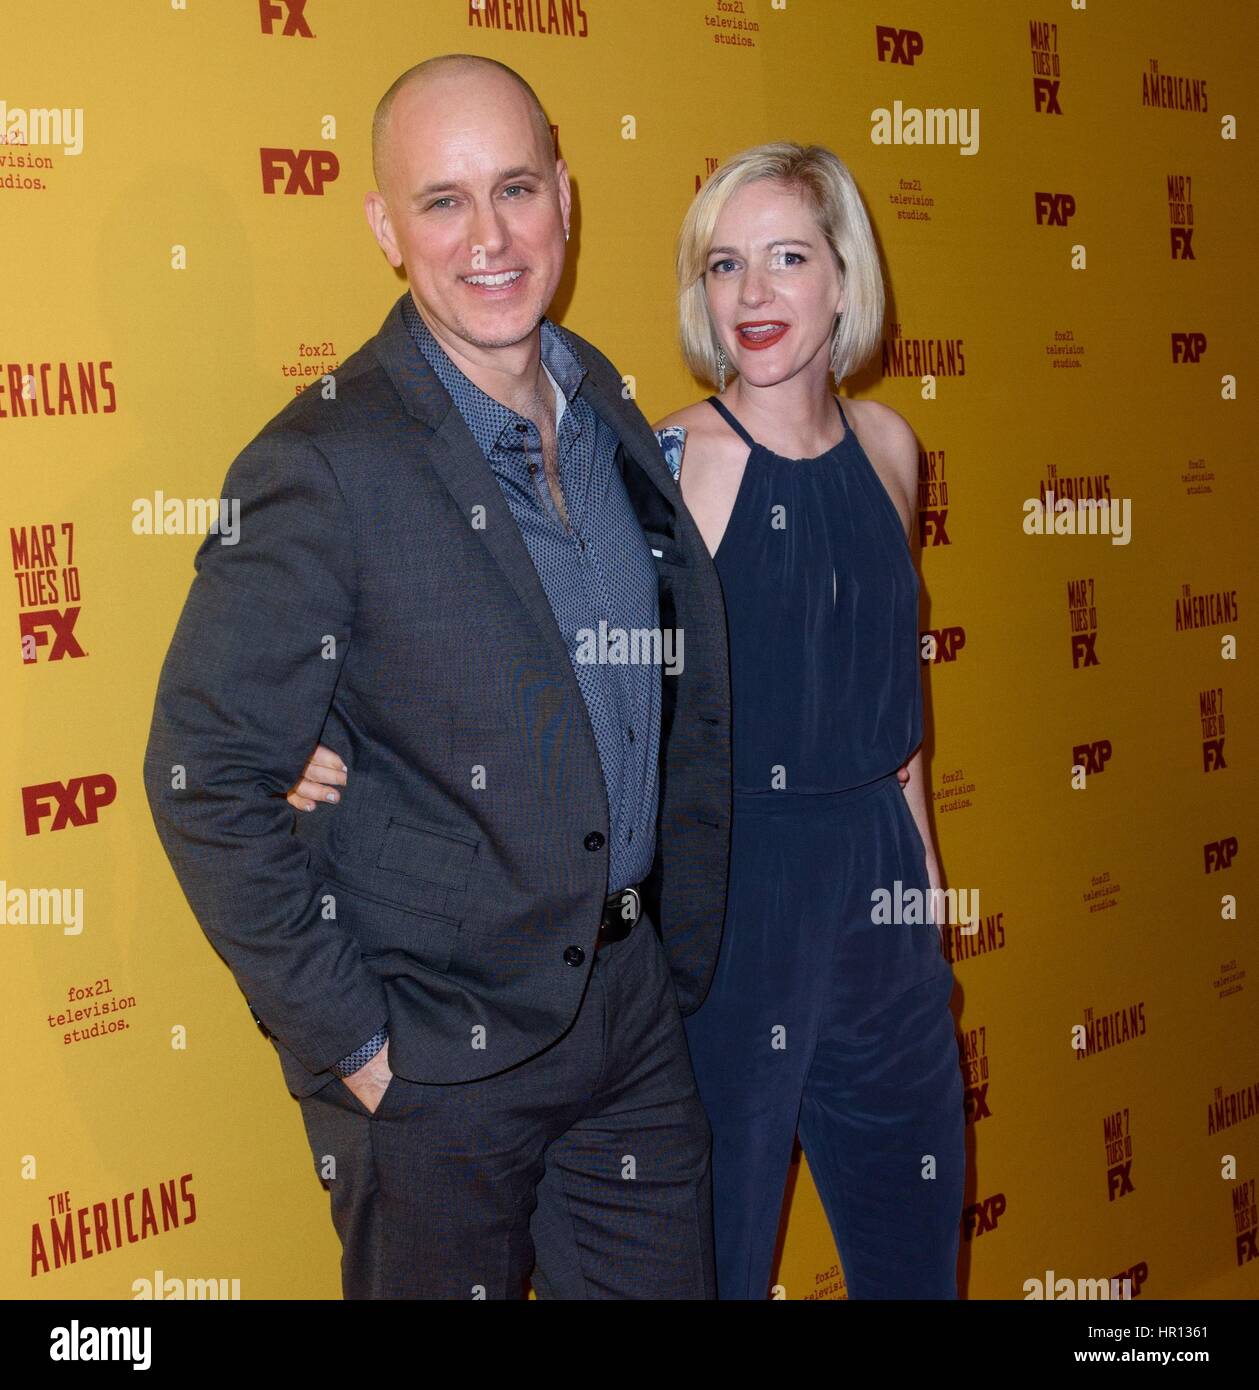 New York, NY, USA. 25th Feb, 2017. Kelly AuCoin, Suzy Jane Hunt at arrivals for THE AMERICANS Season Five Premiere, Directors Guild of America (DGA) Theater, New York, NY February 25, 2017. Credit: RCF/Everett Collection/Alamy Live News Stock Photo